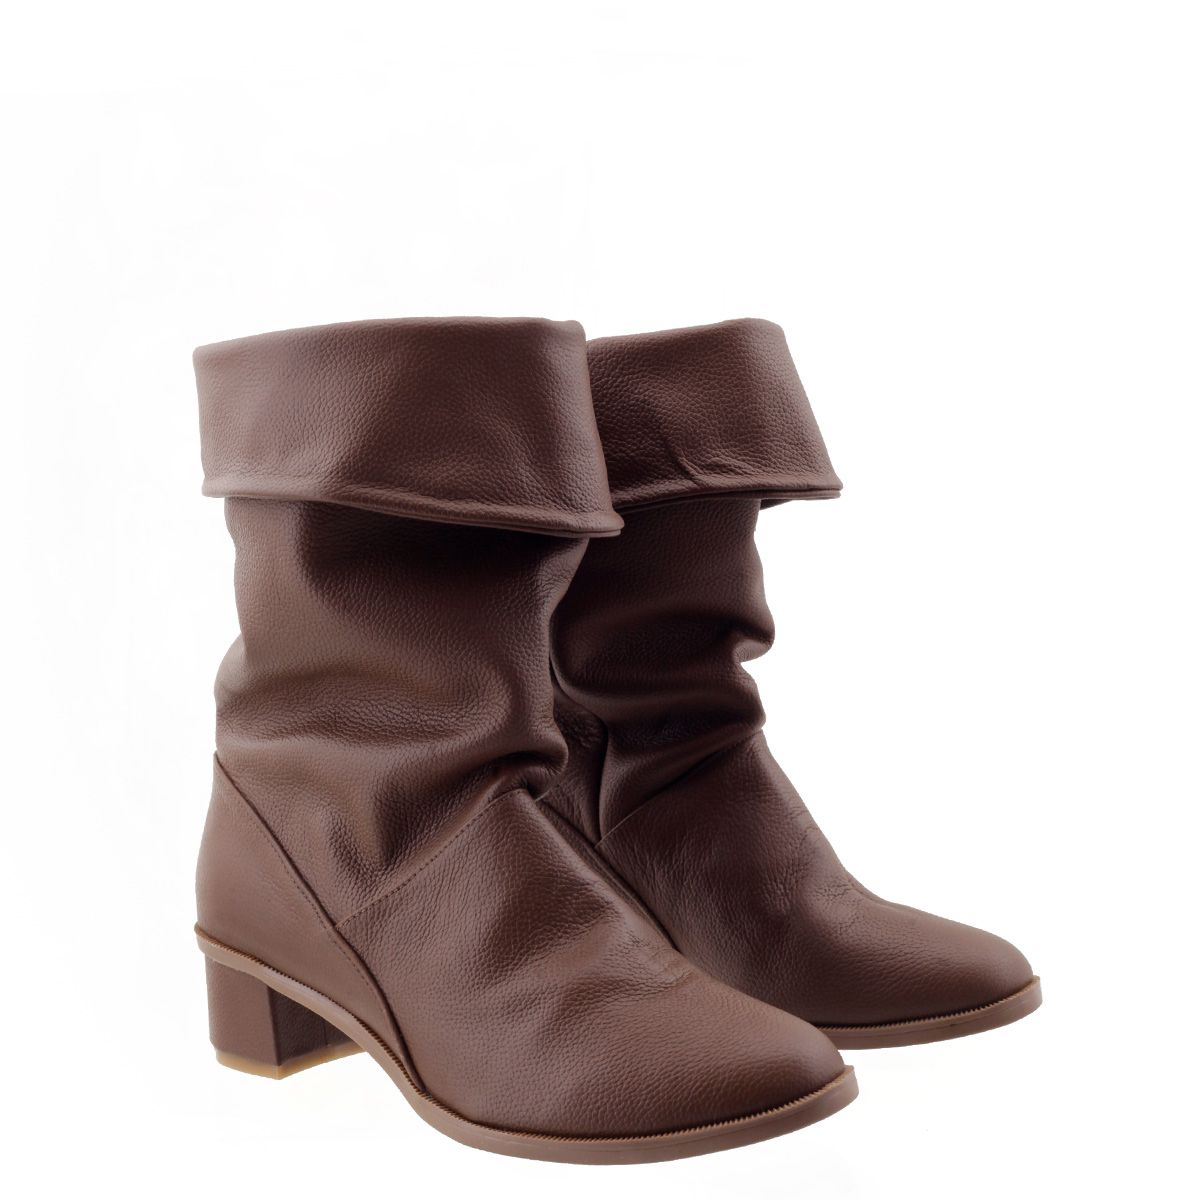 Slouch Boots Couro Legítimo Marrom